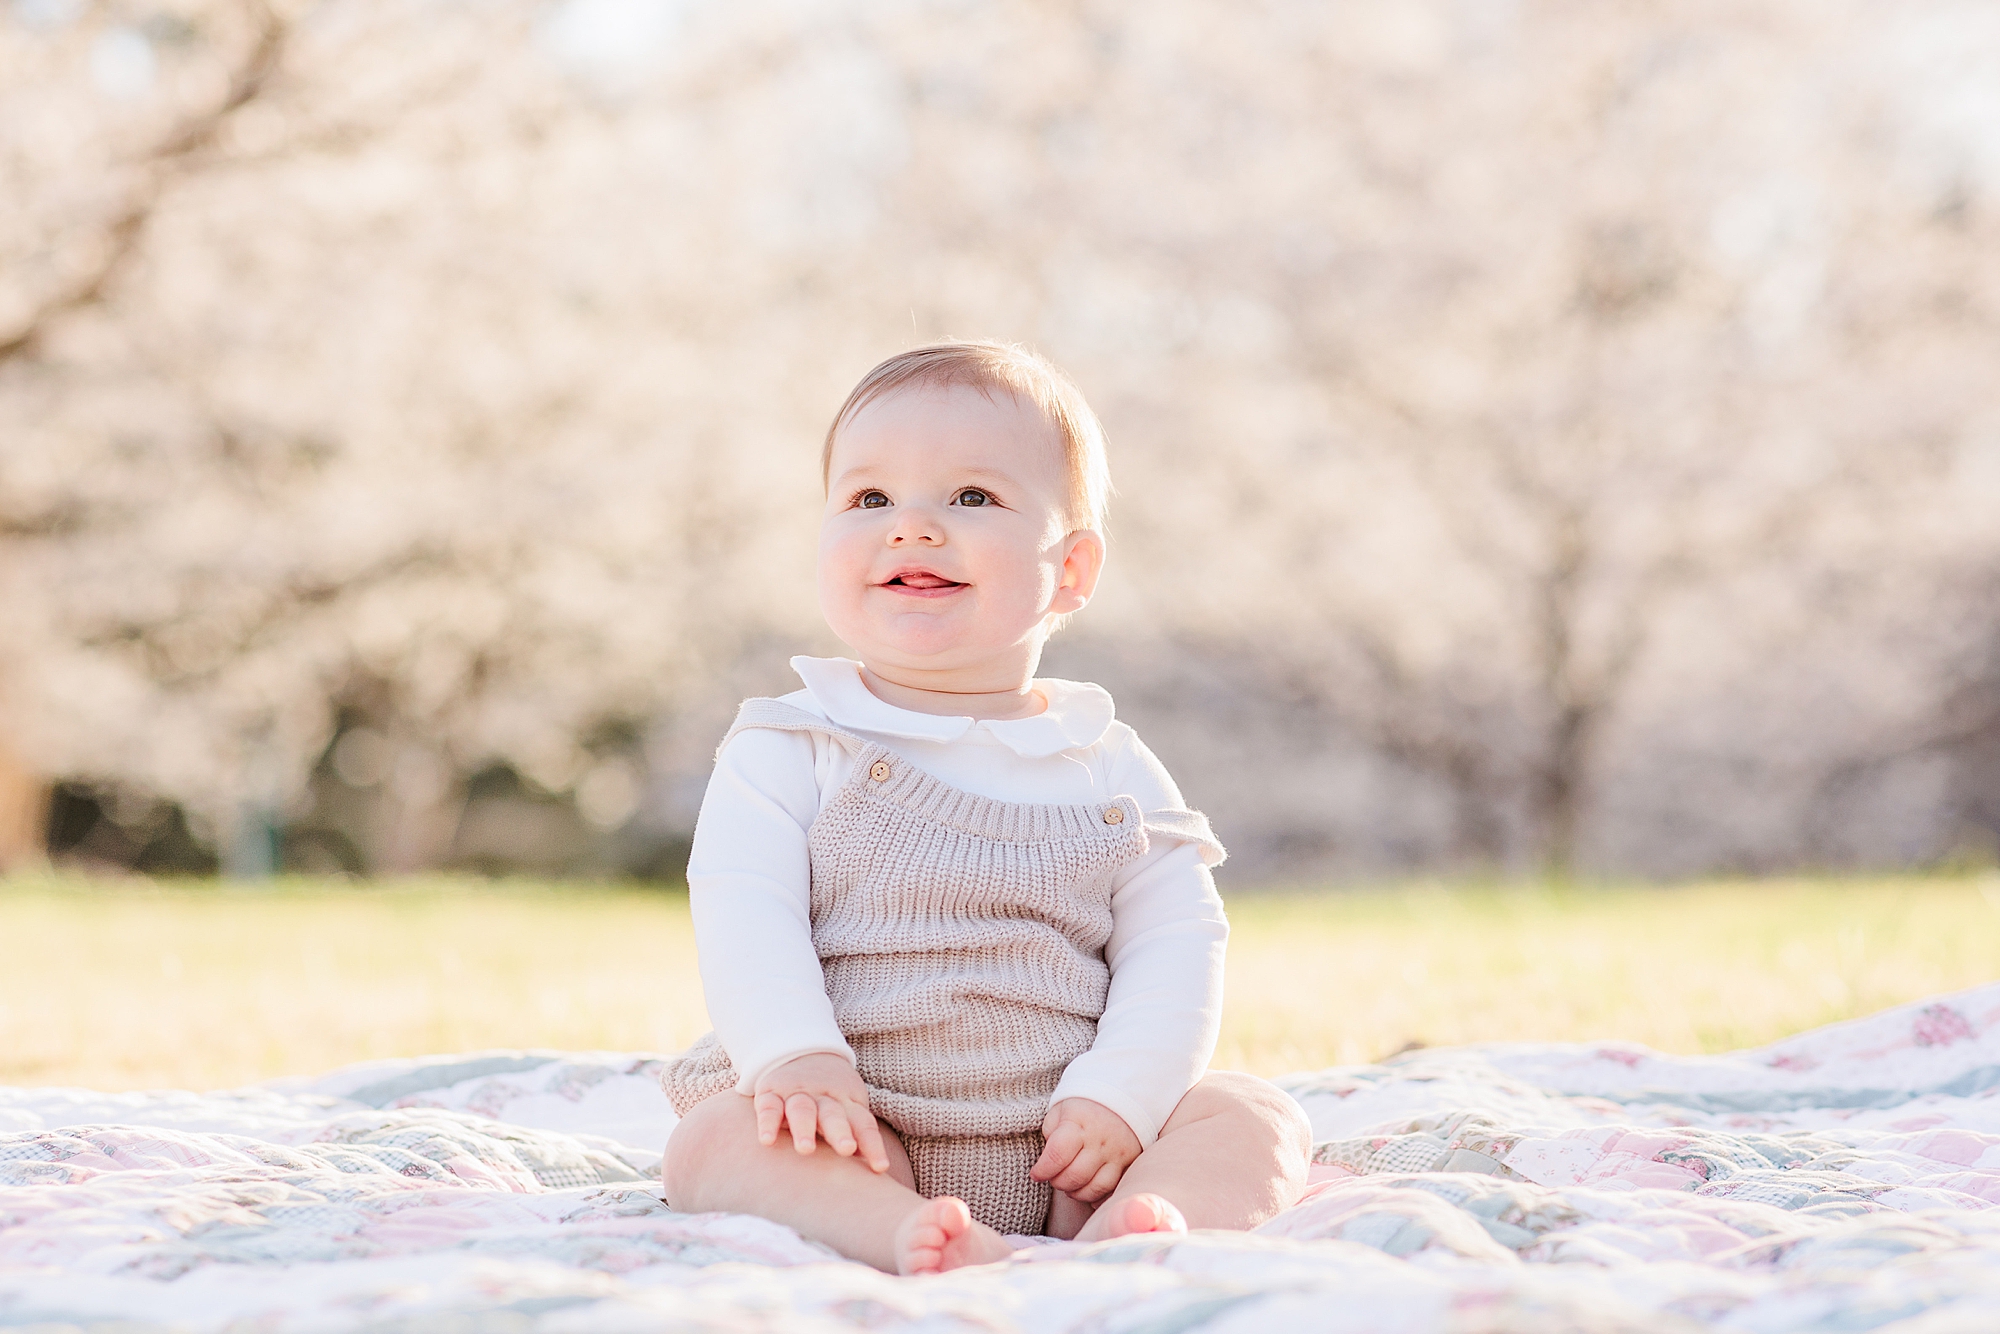 milestone portraits for your baby in Maryland: inspiration from Christina Tundo Photography 